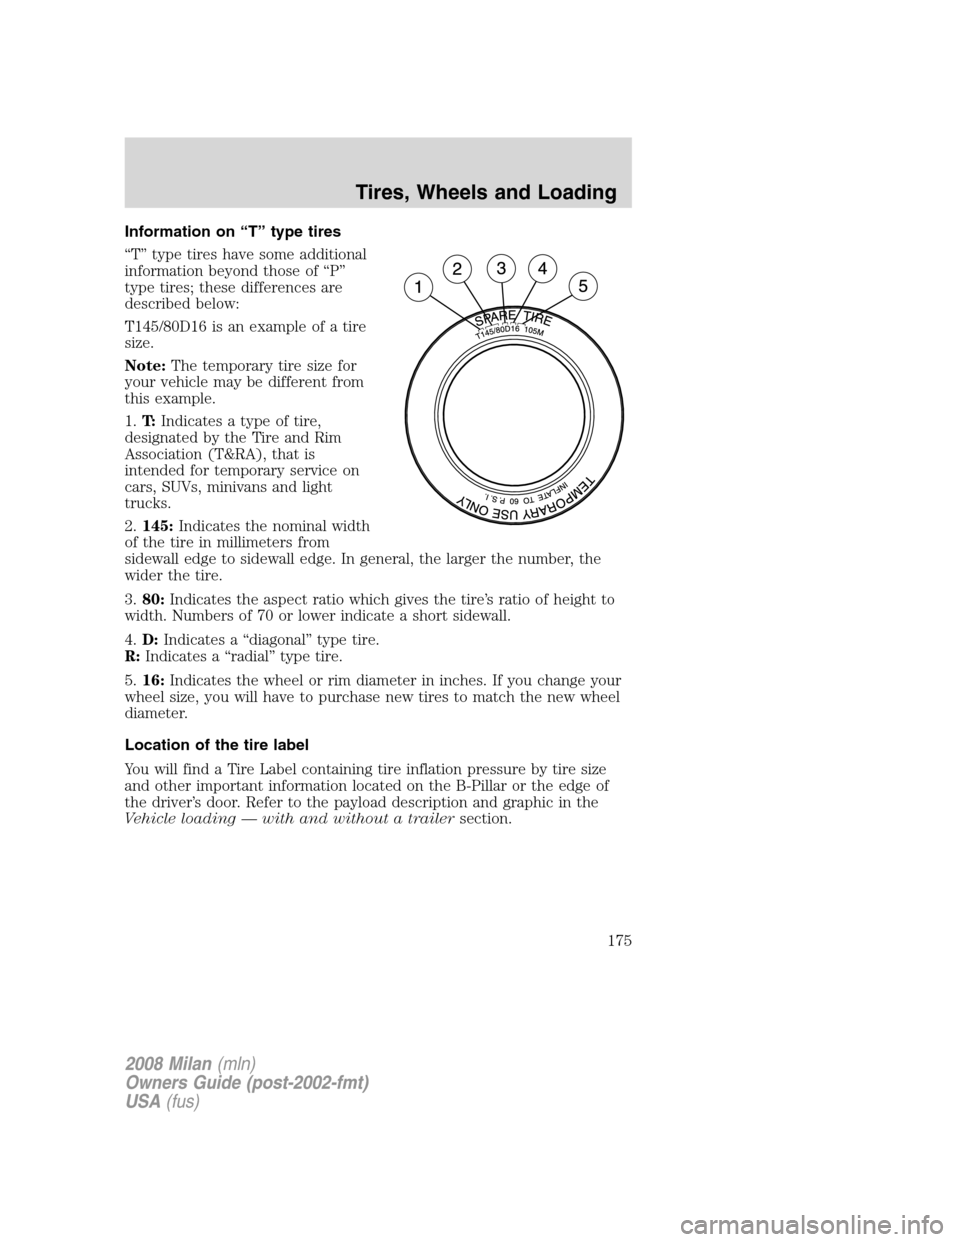 Mercury Milan 2008  Owners Manuals Information on “T” type tires
“T” type tires have some additional
information beyond those of “P”
type tires; these differences are
described below:
T145/80D16 is an example of a tire
size